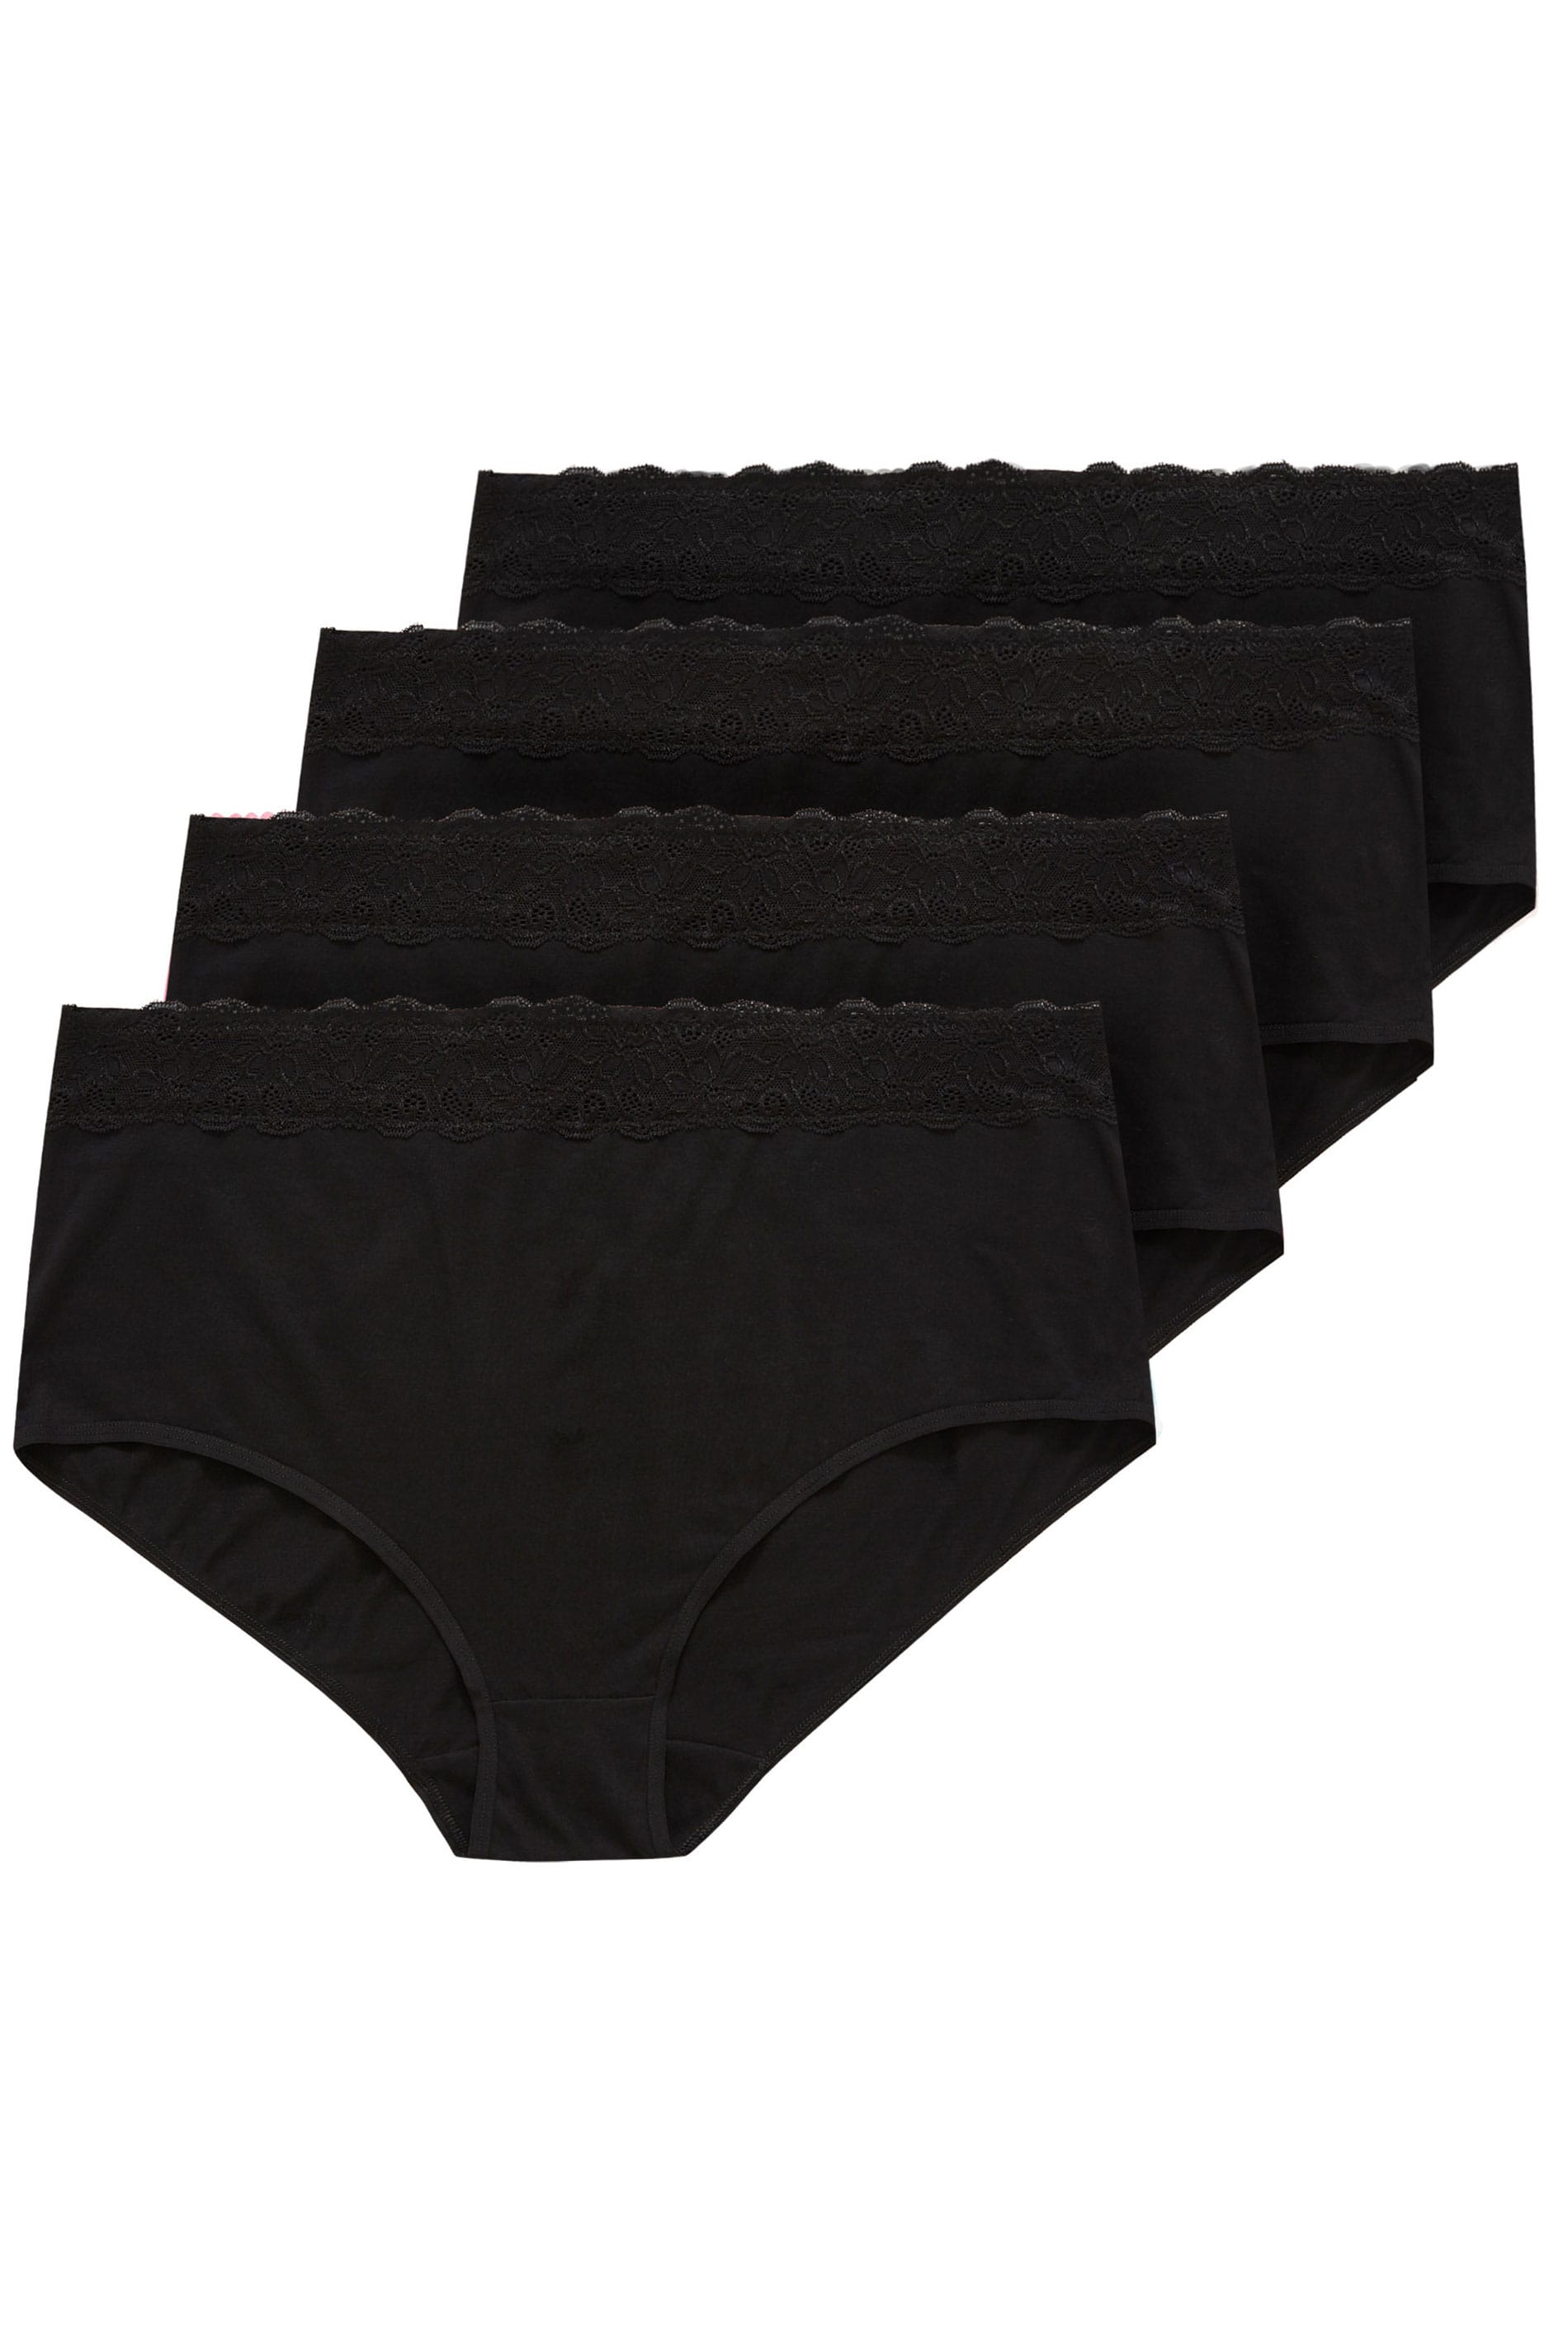 4 PACK Black Lace Trim High Waisted Full Briefs  | Yours Clothing 2